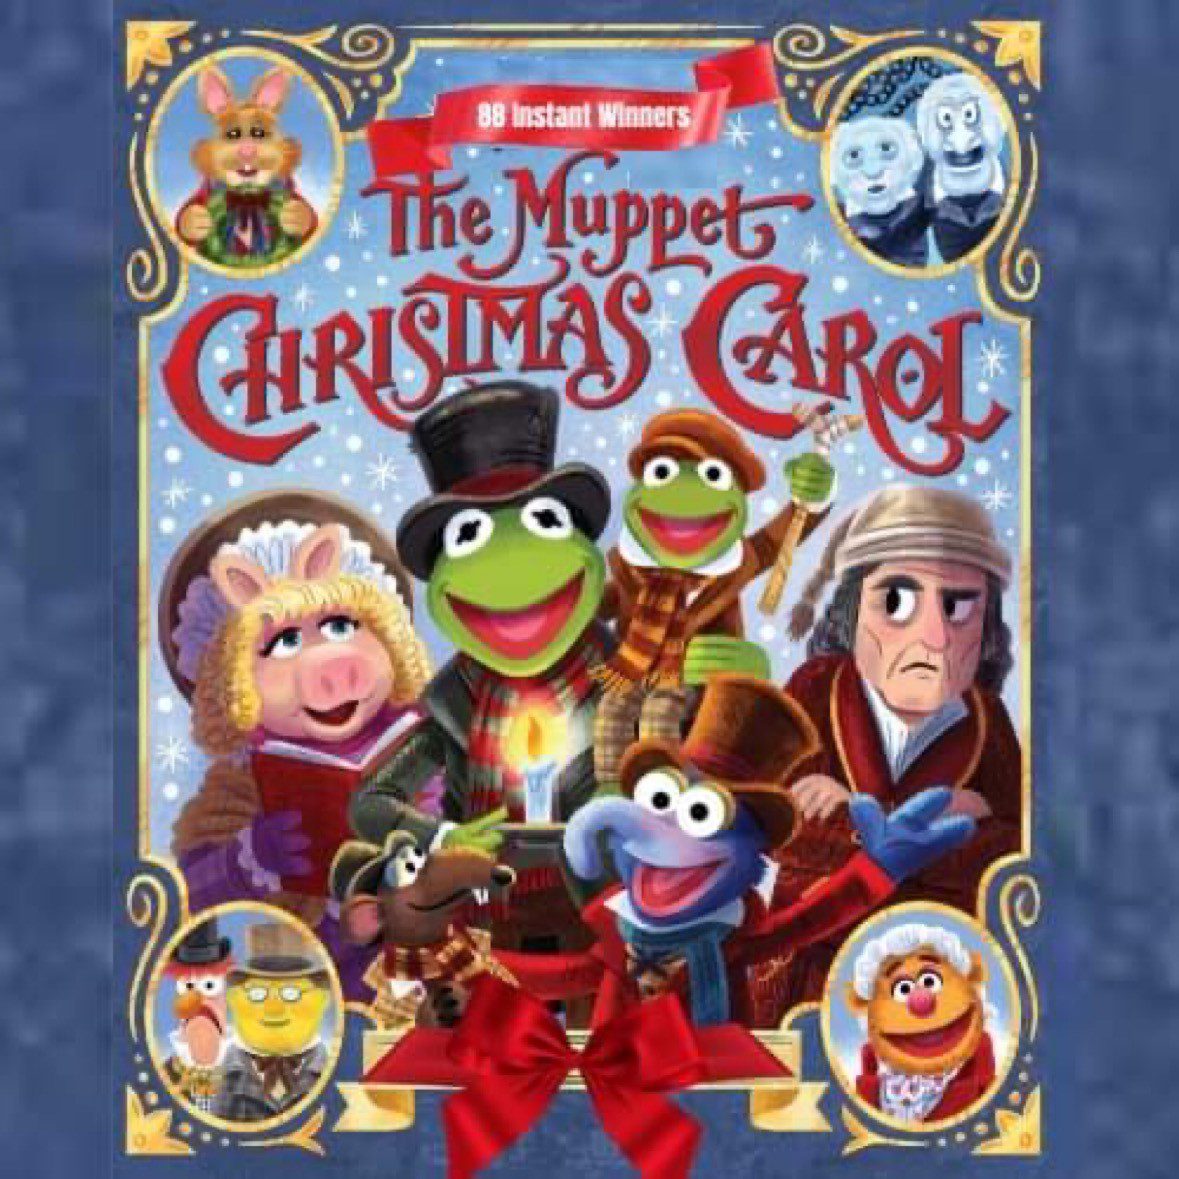 The Muppets £3000 Christmas Carol with 88 Instant Wins - Royalux  Competitions